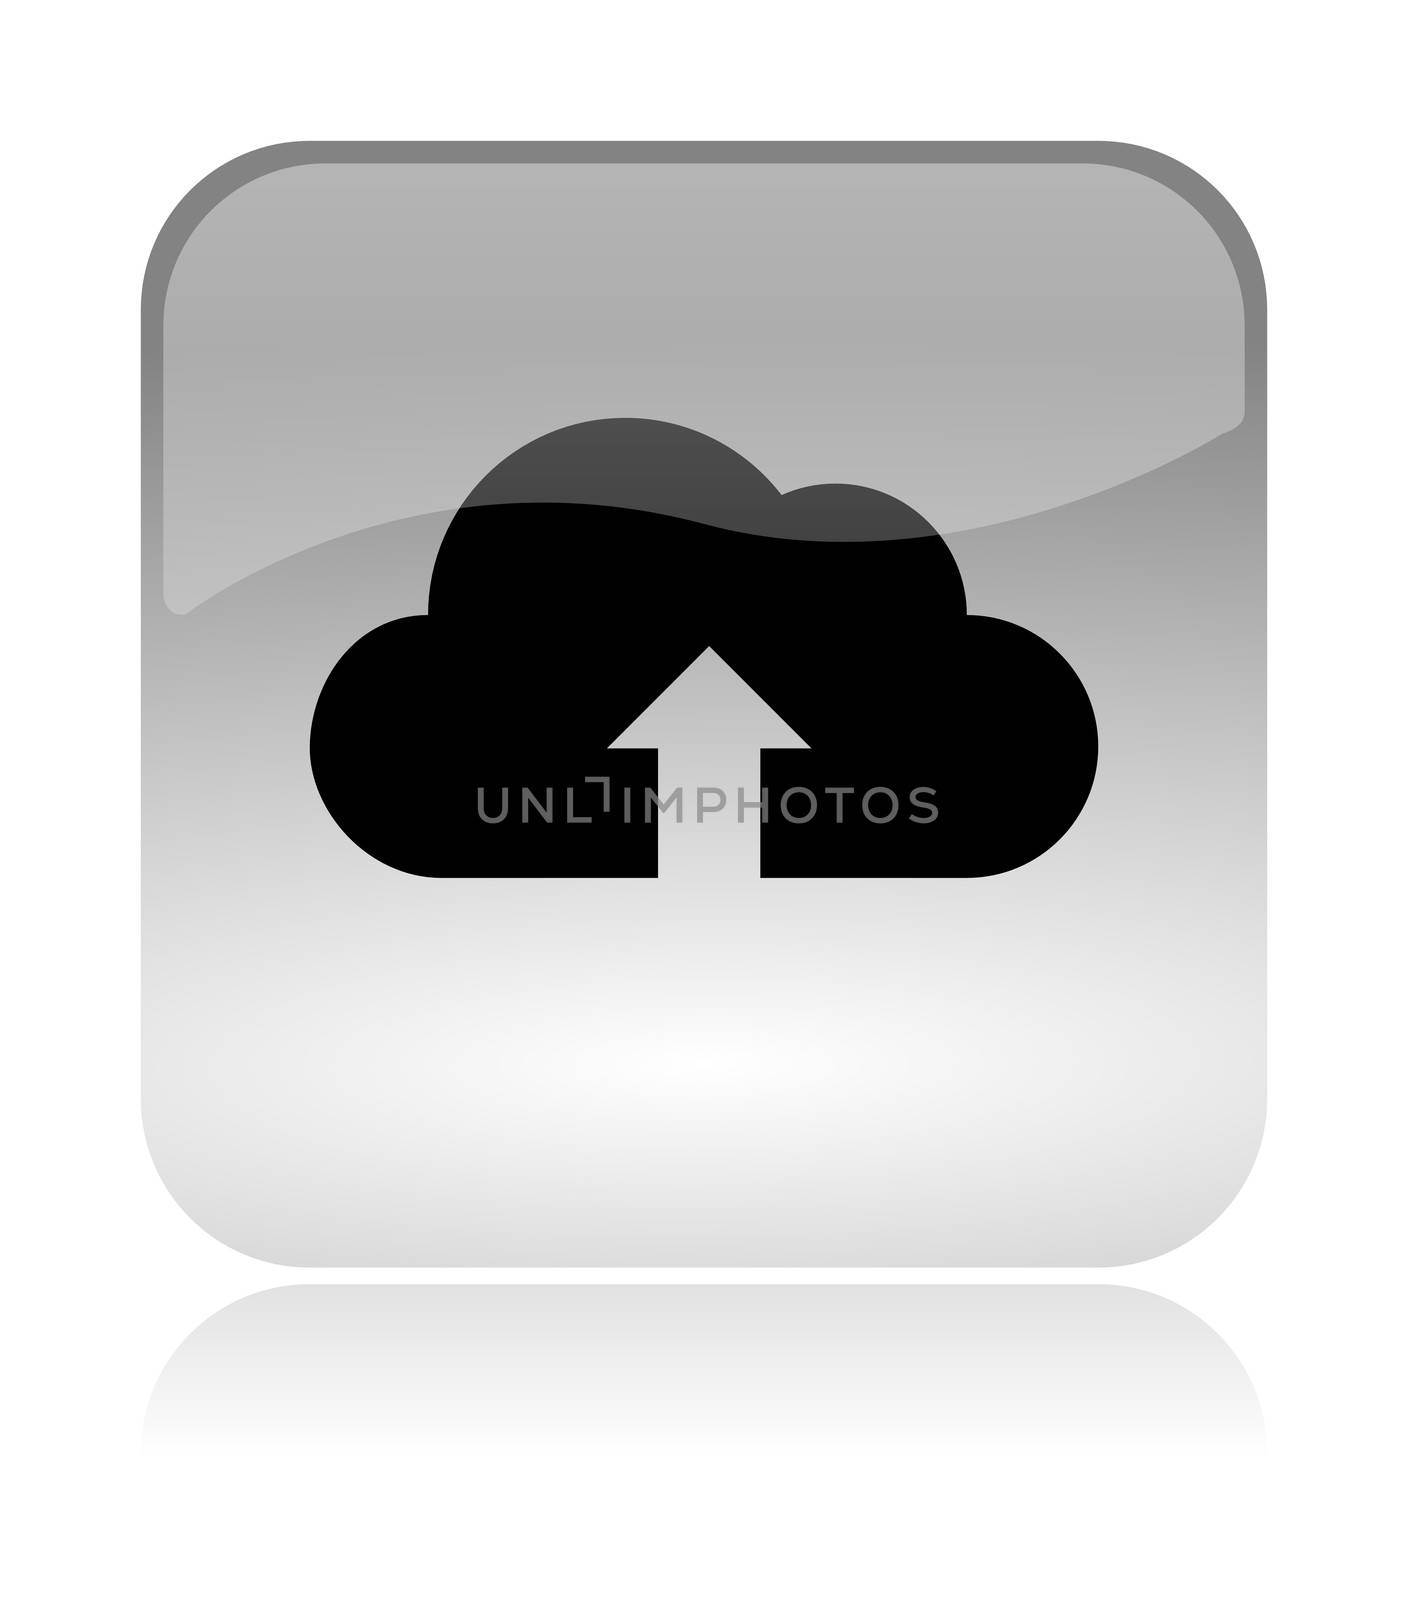 Cloud Computing Data Upload Concept Rounded Square Icon with Reflection Illustration Isolated on White Background